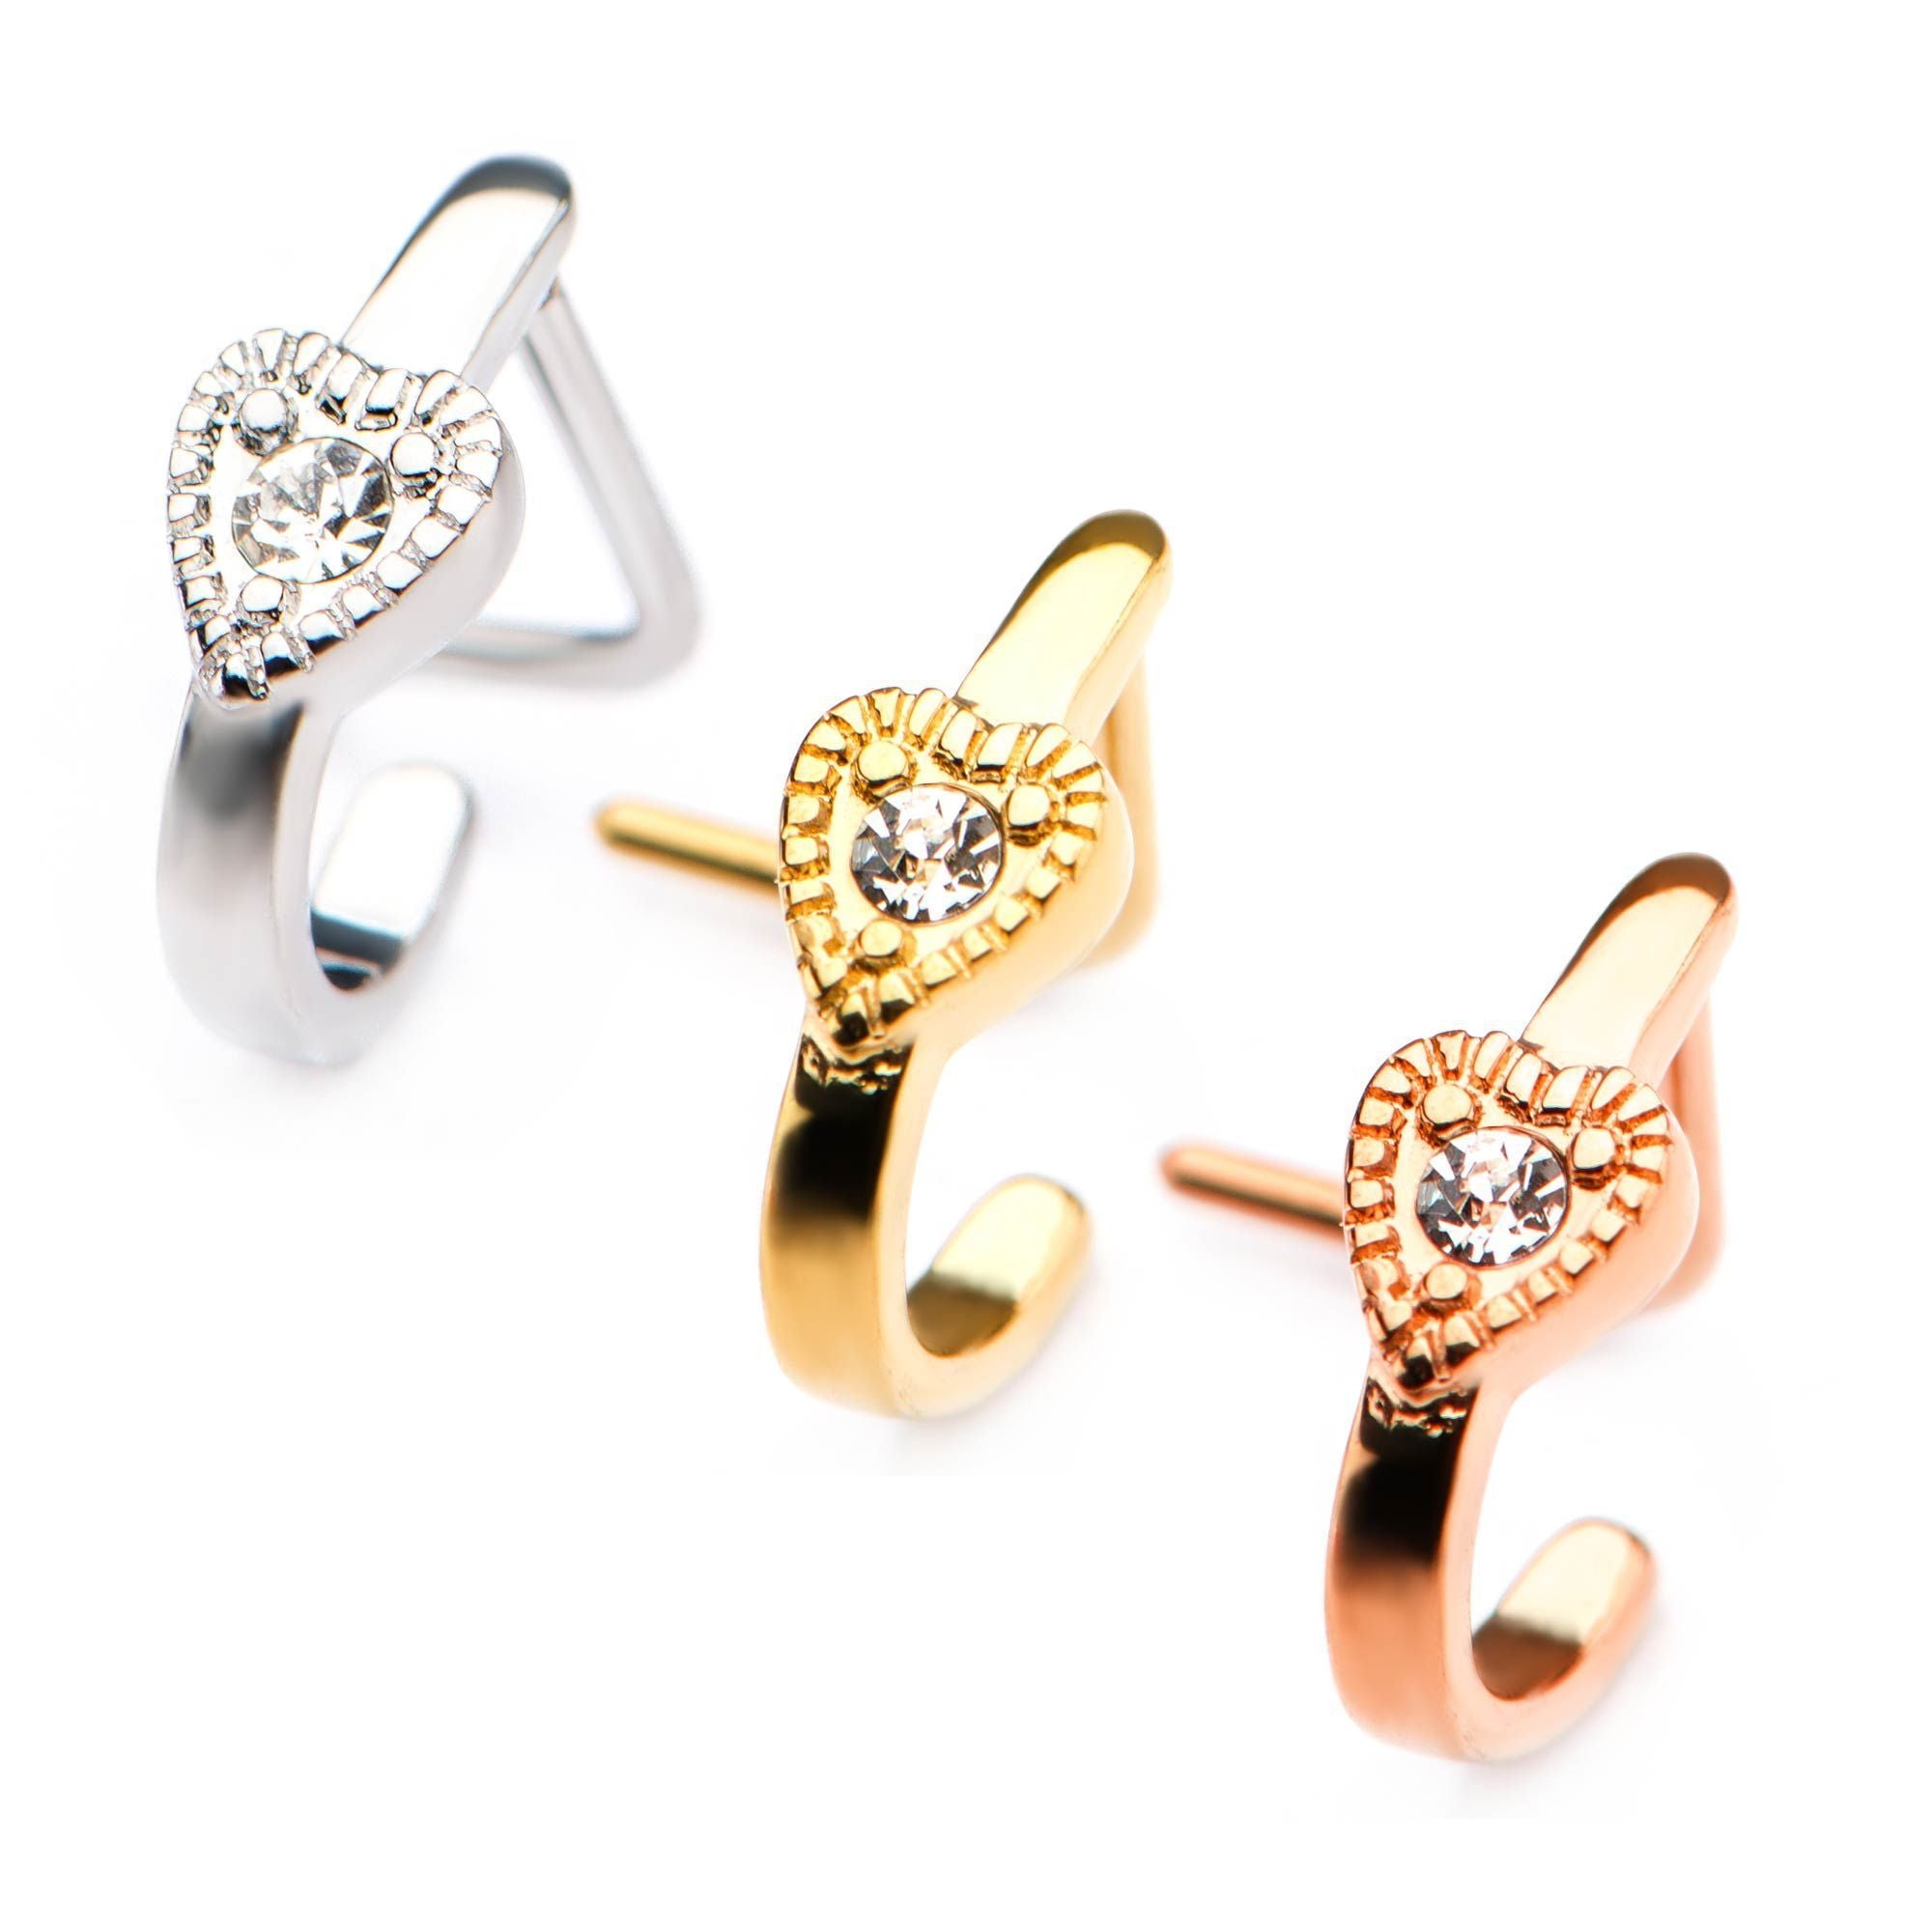 L-Bend Nose Huggers w/ Heart and Clear CZ Gem sbvnslh2